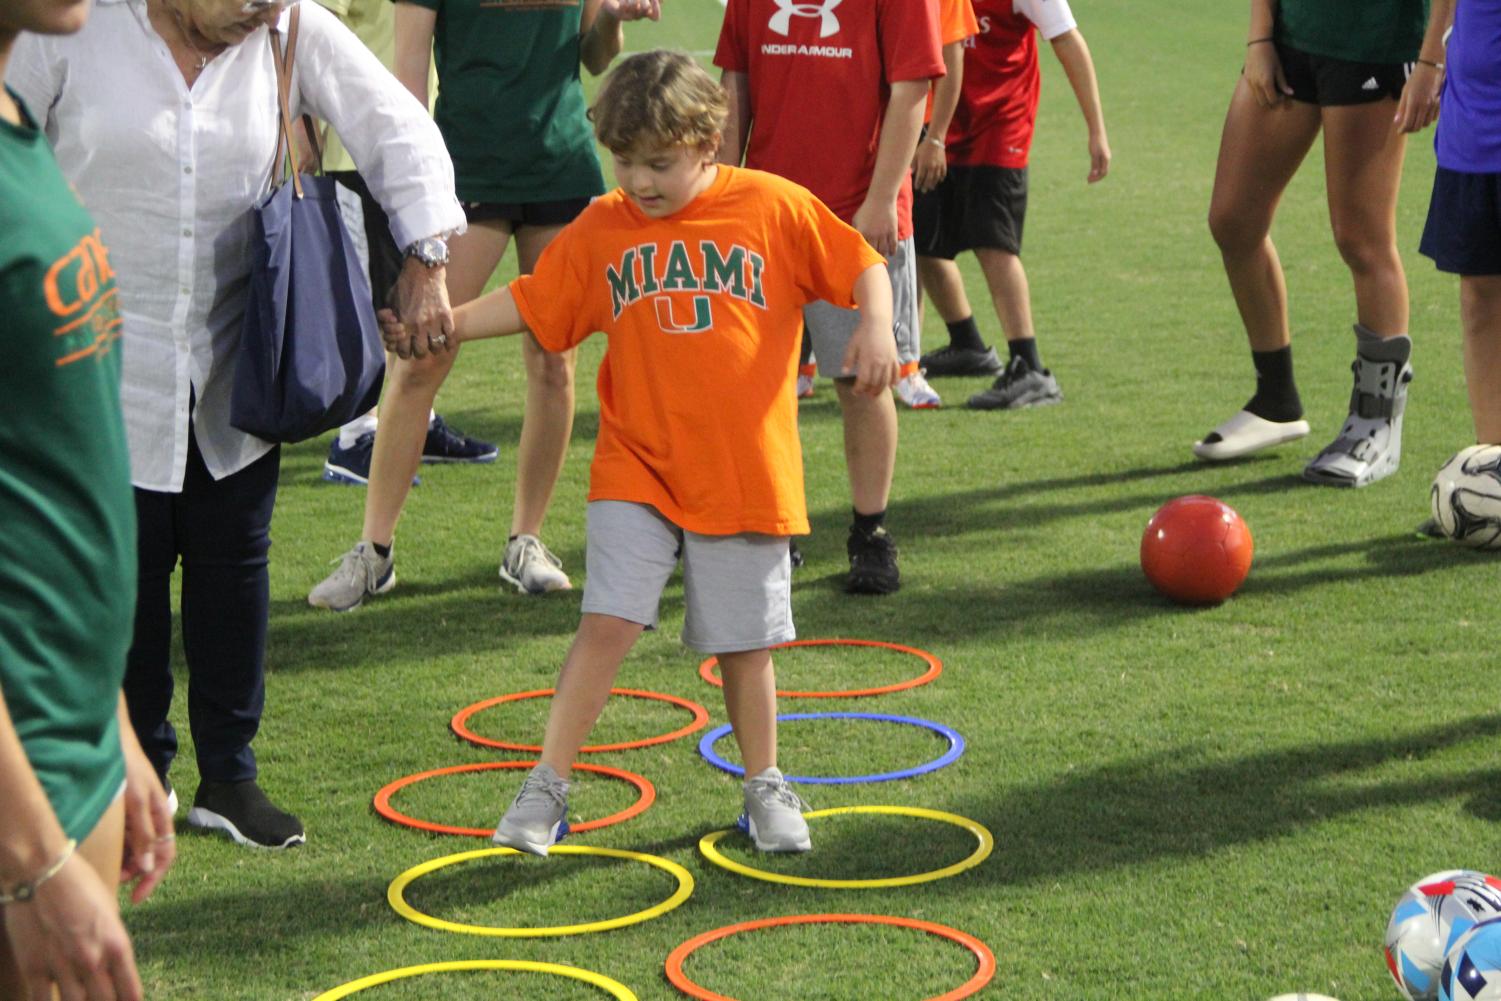 Empowering+Down+Syndrome+Individuals+Through+Mr.+Paz%E2%80%99s+Soccer+Clinic